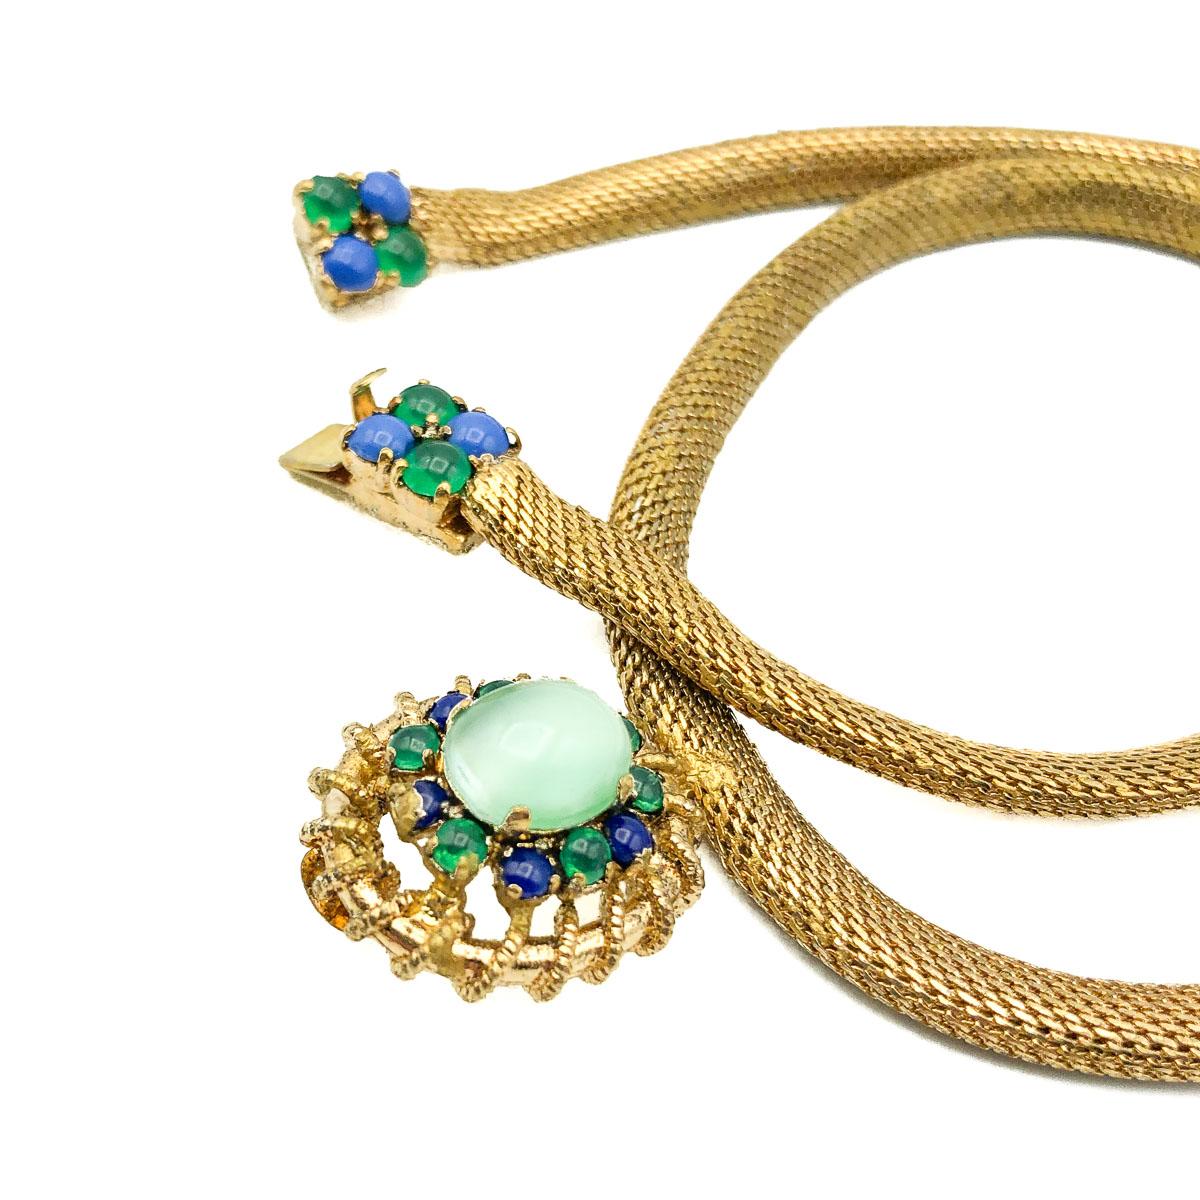 Vintage Dior All at Sea Collar. Crafted in gold plated metal and set with glass cabochon stones in a variety of blues and greens; reminding us of the exotic colours of the sea. Good vintage condition, signed and dated, approx. 42cms. A delightful